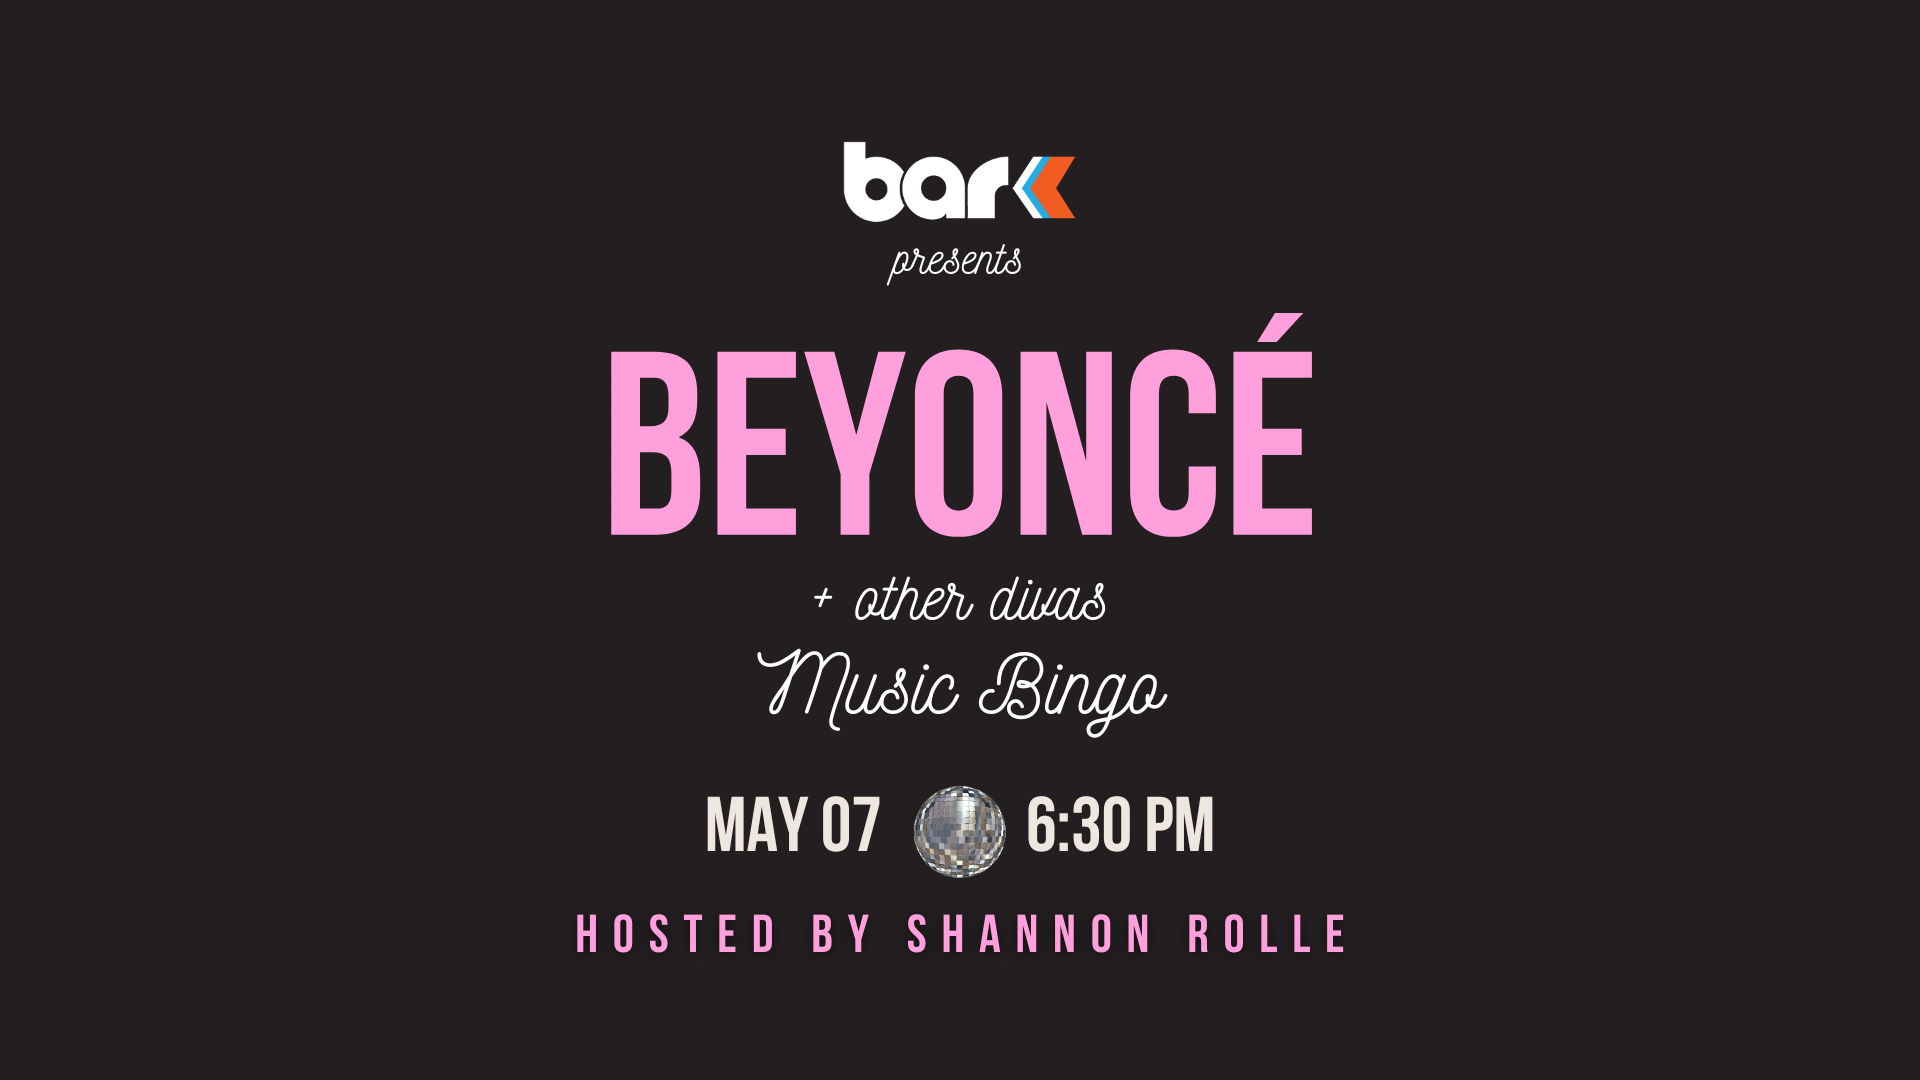 Bar K Presents Beyonce and other divas music bingo may 7 6:30 pm hosted by shannon Rolle